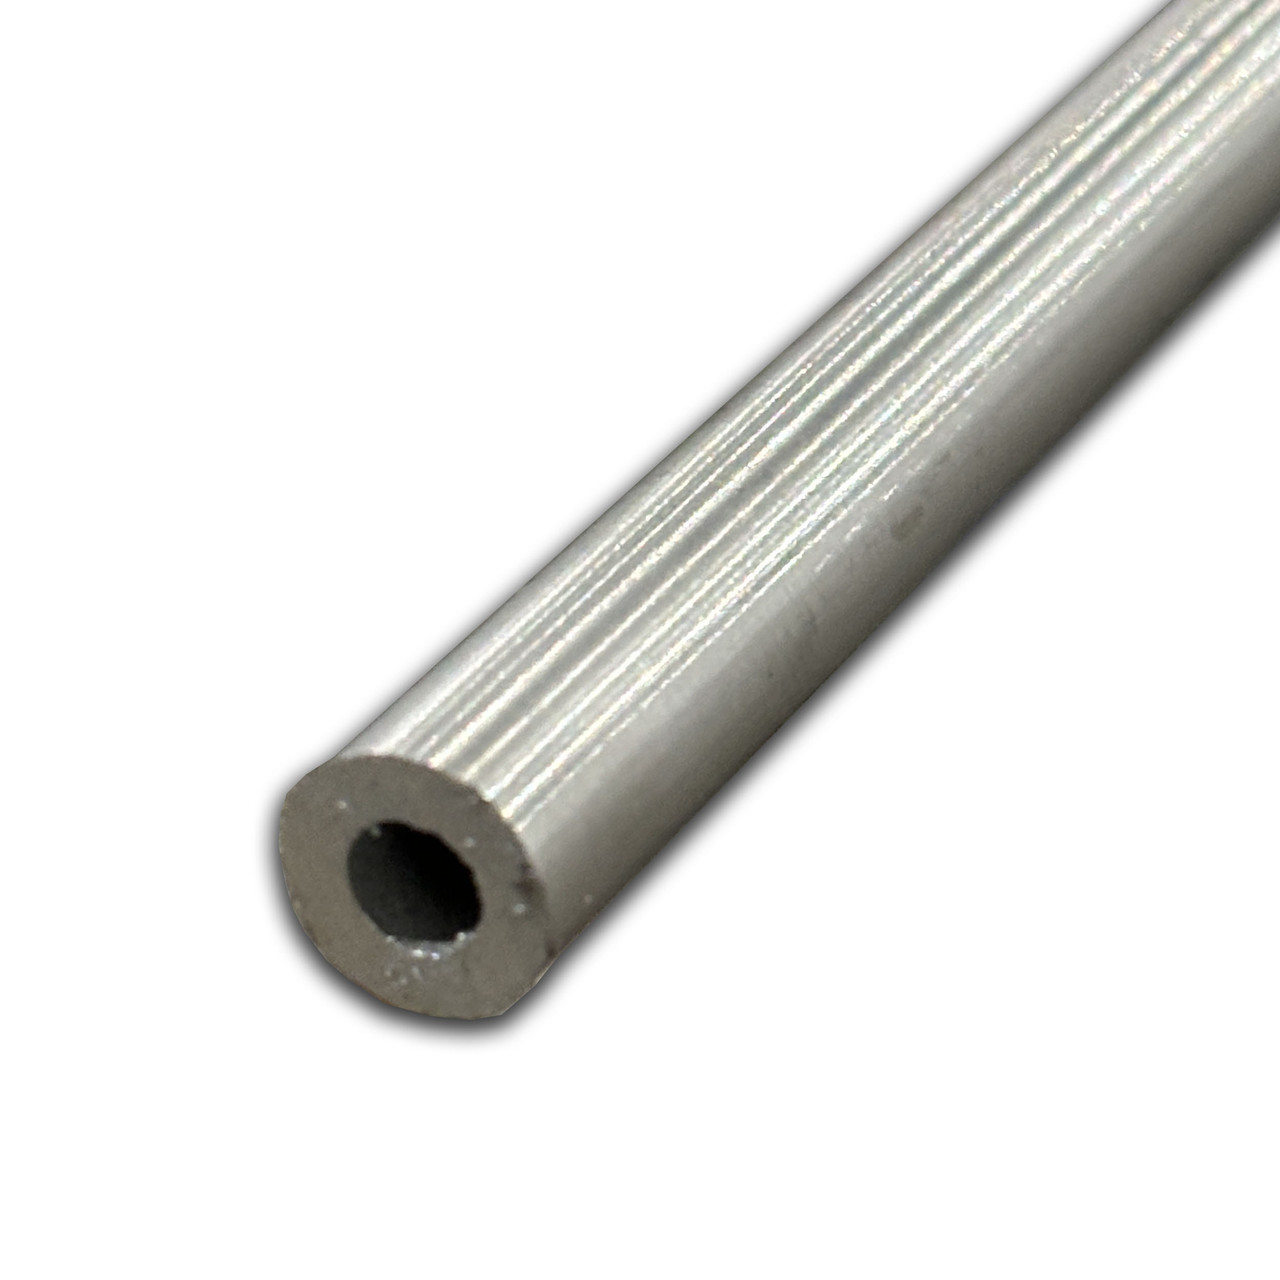 0.313" OD x 0.083" Wall x 72 inches, 304 Stainless Steel Round Tube, Seamless